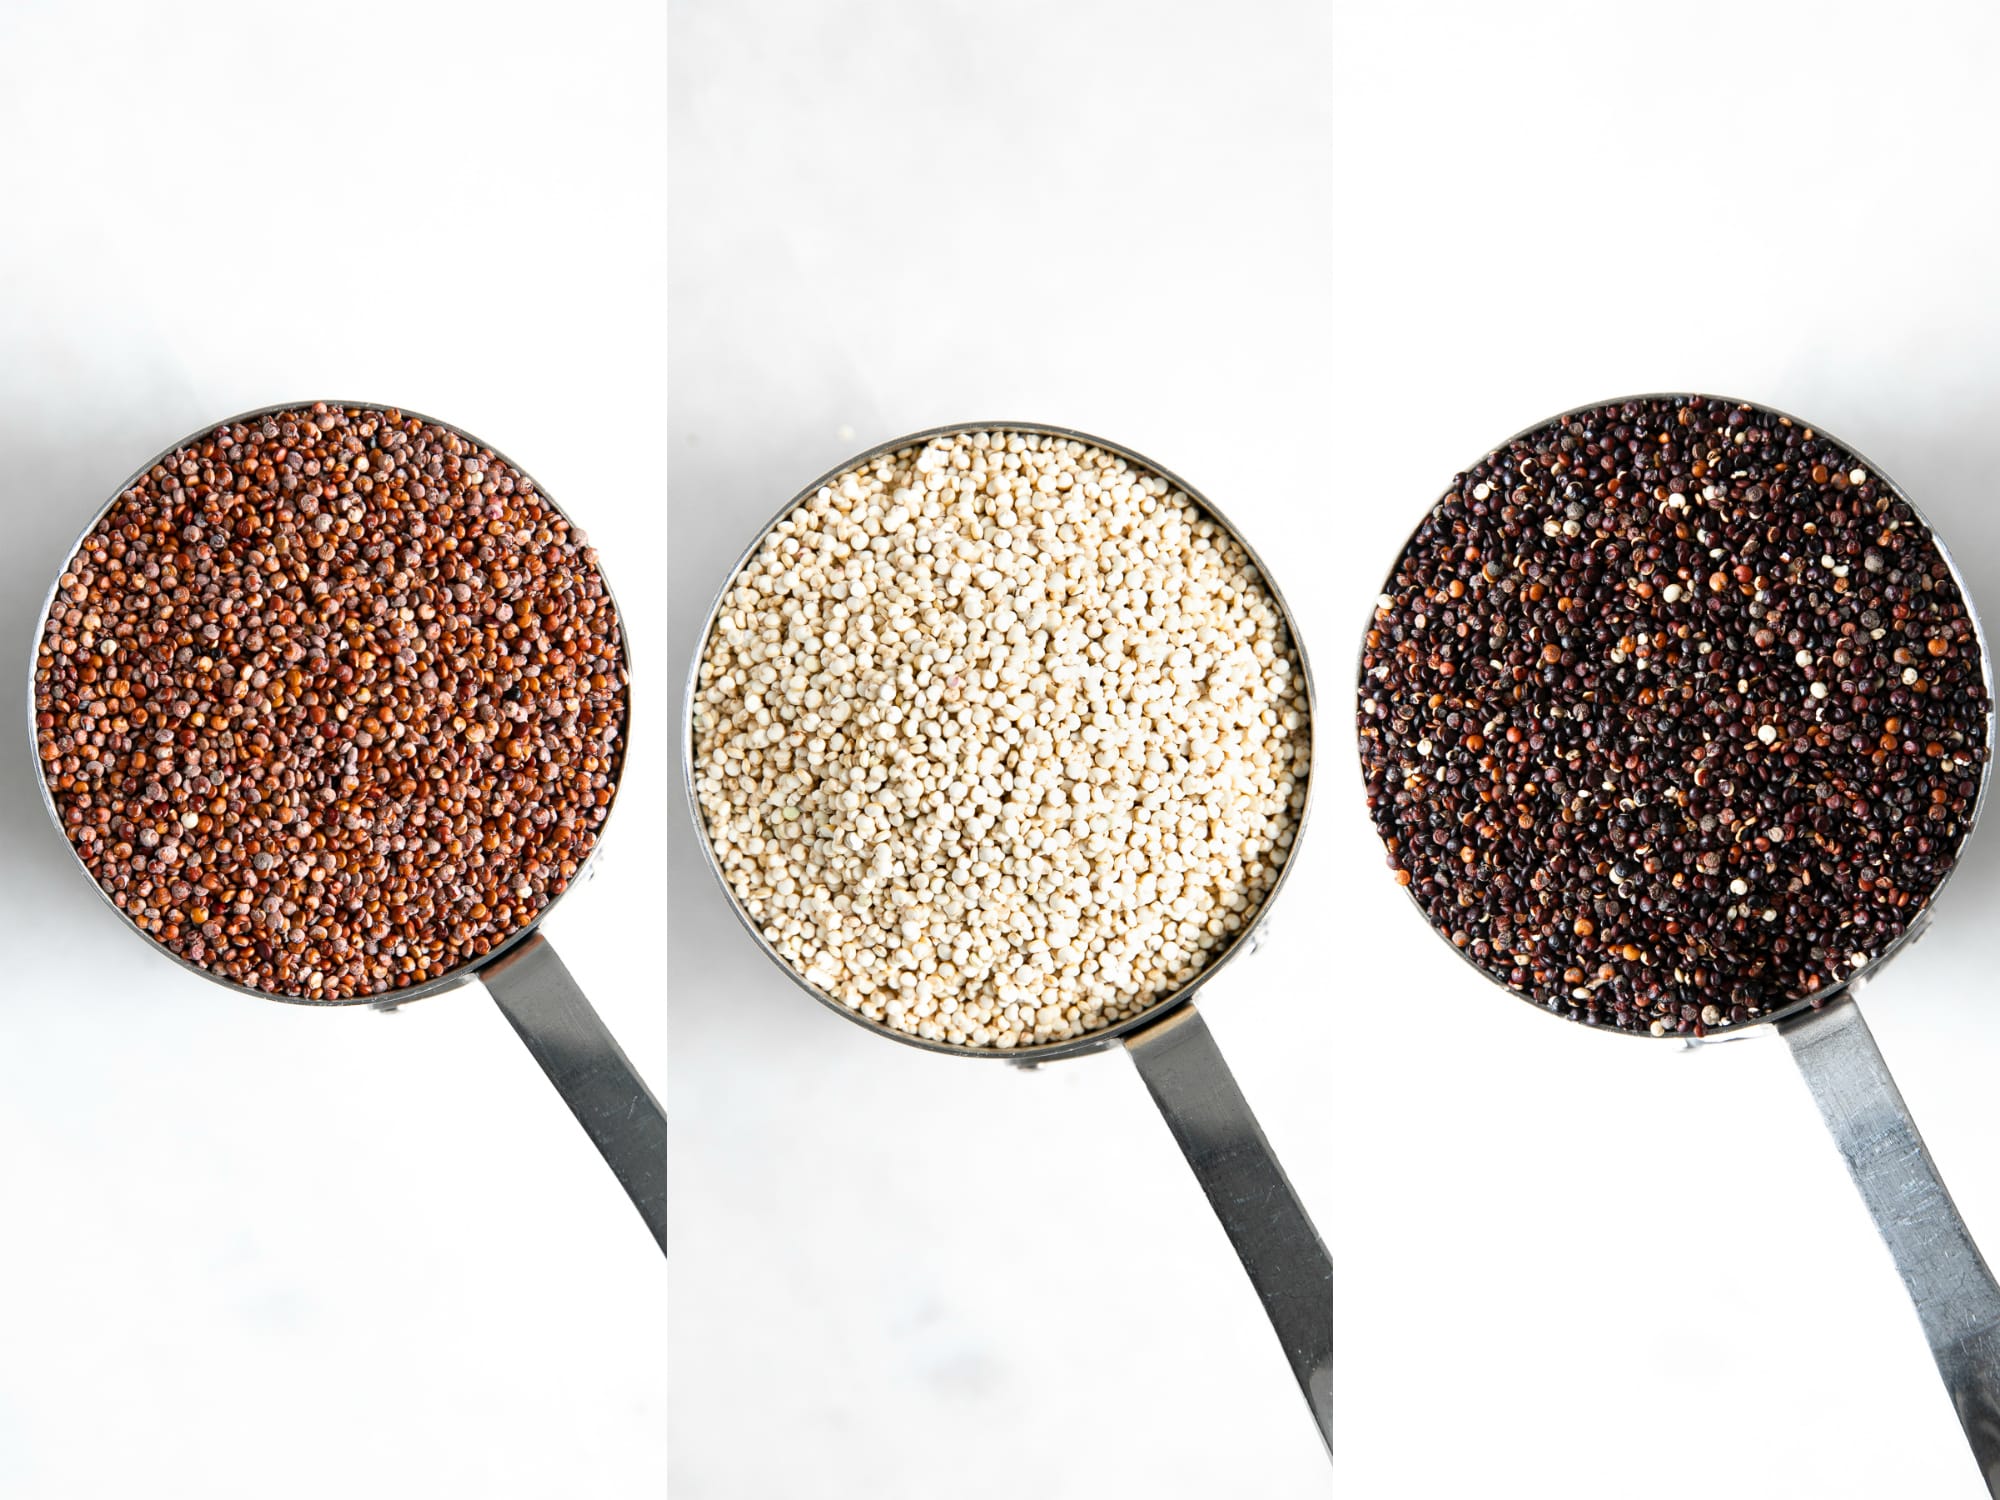 Measuring cups filled with different colored quinoa.